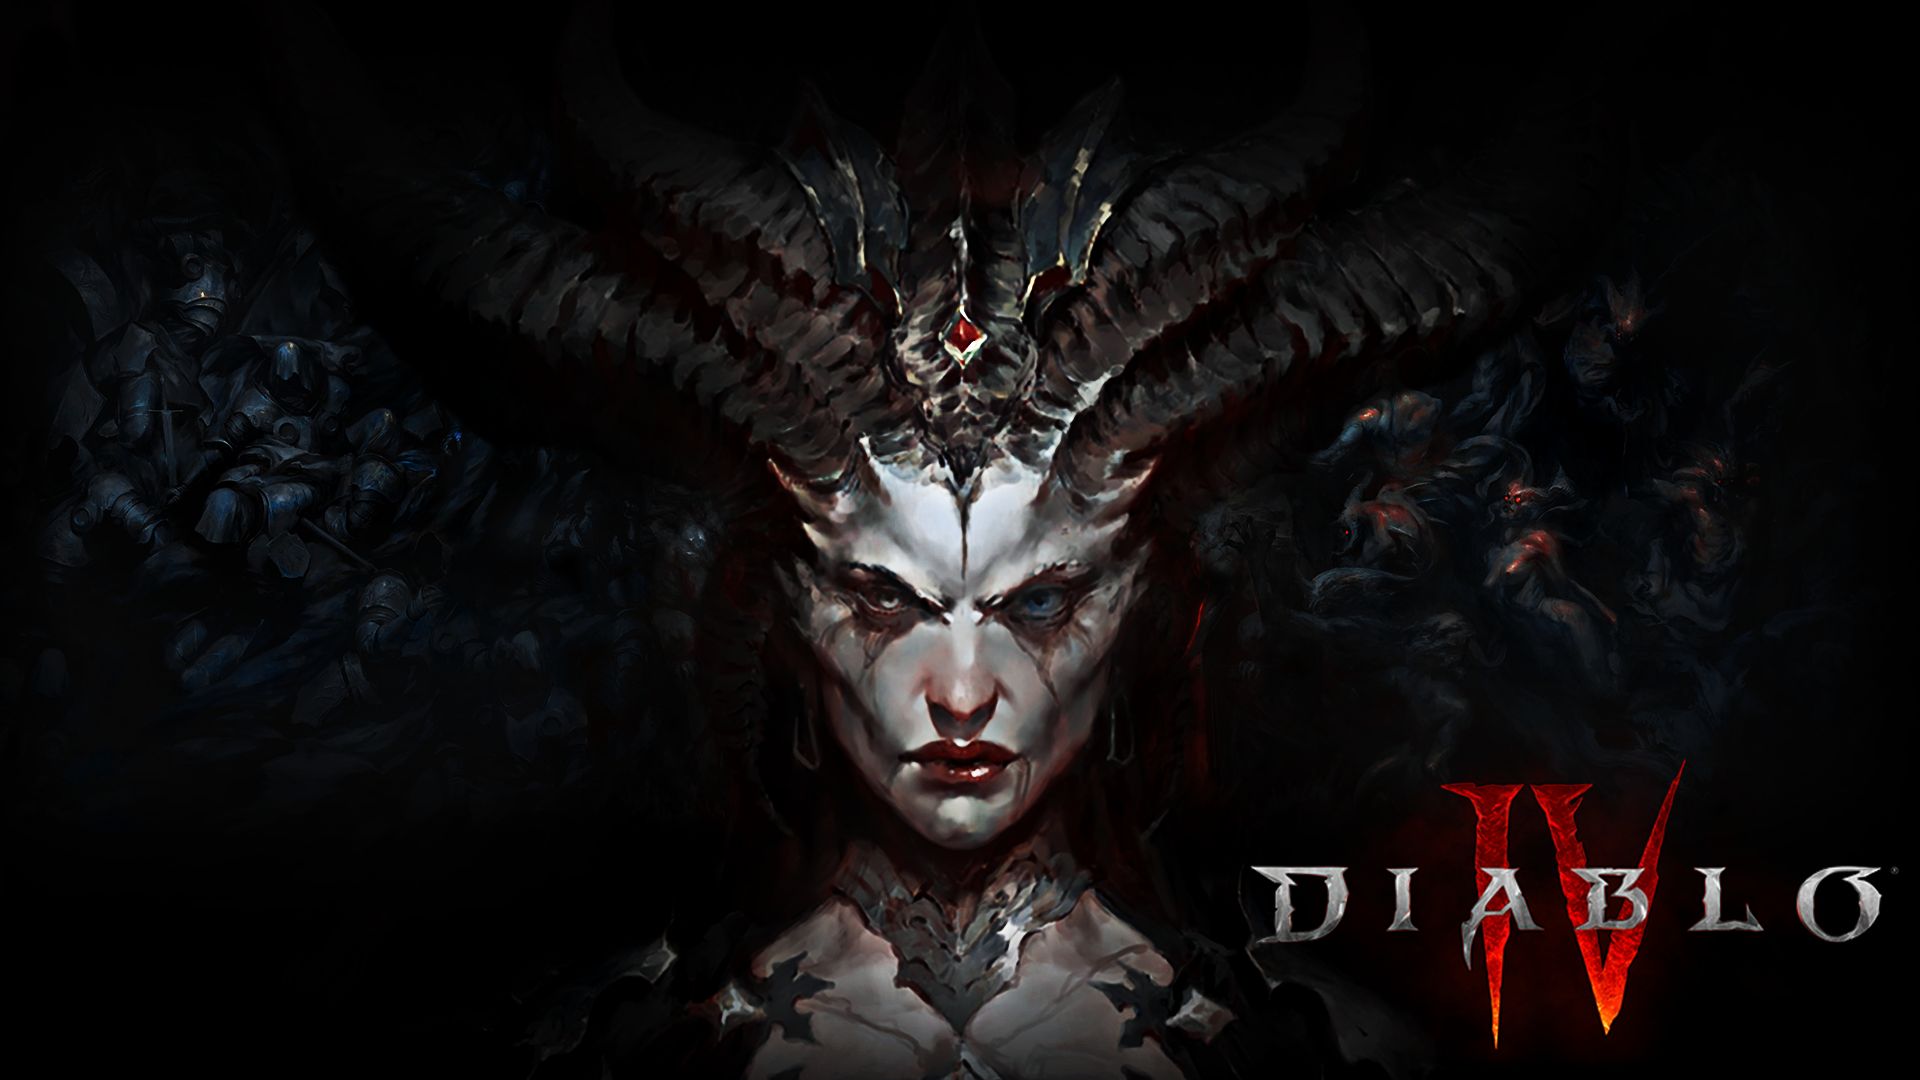 Diablo 4 Release Date, Gameplay, Story Details, Rumors and Other Updates on the Blizzard Game